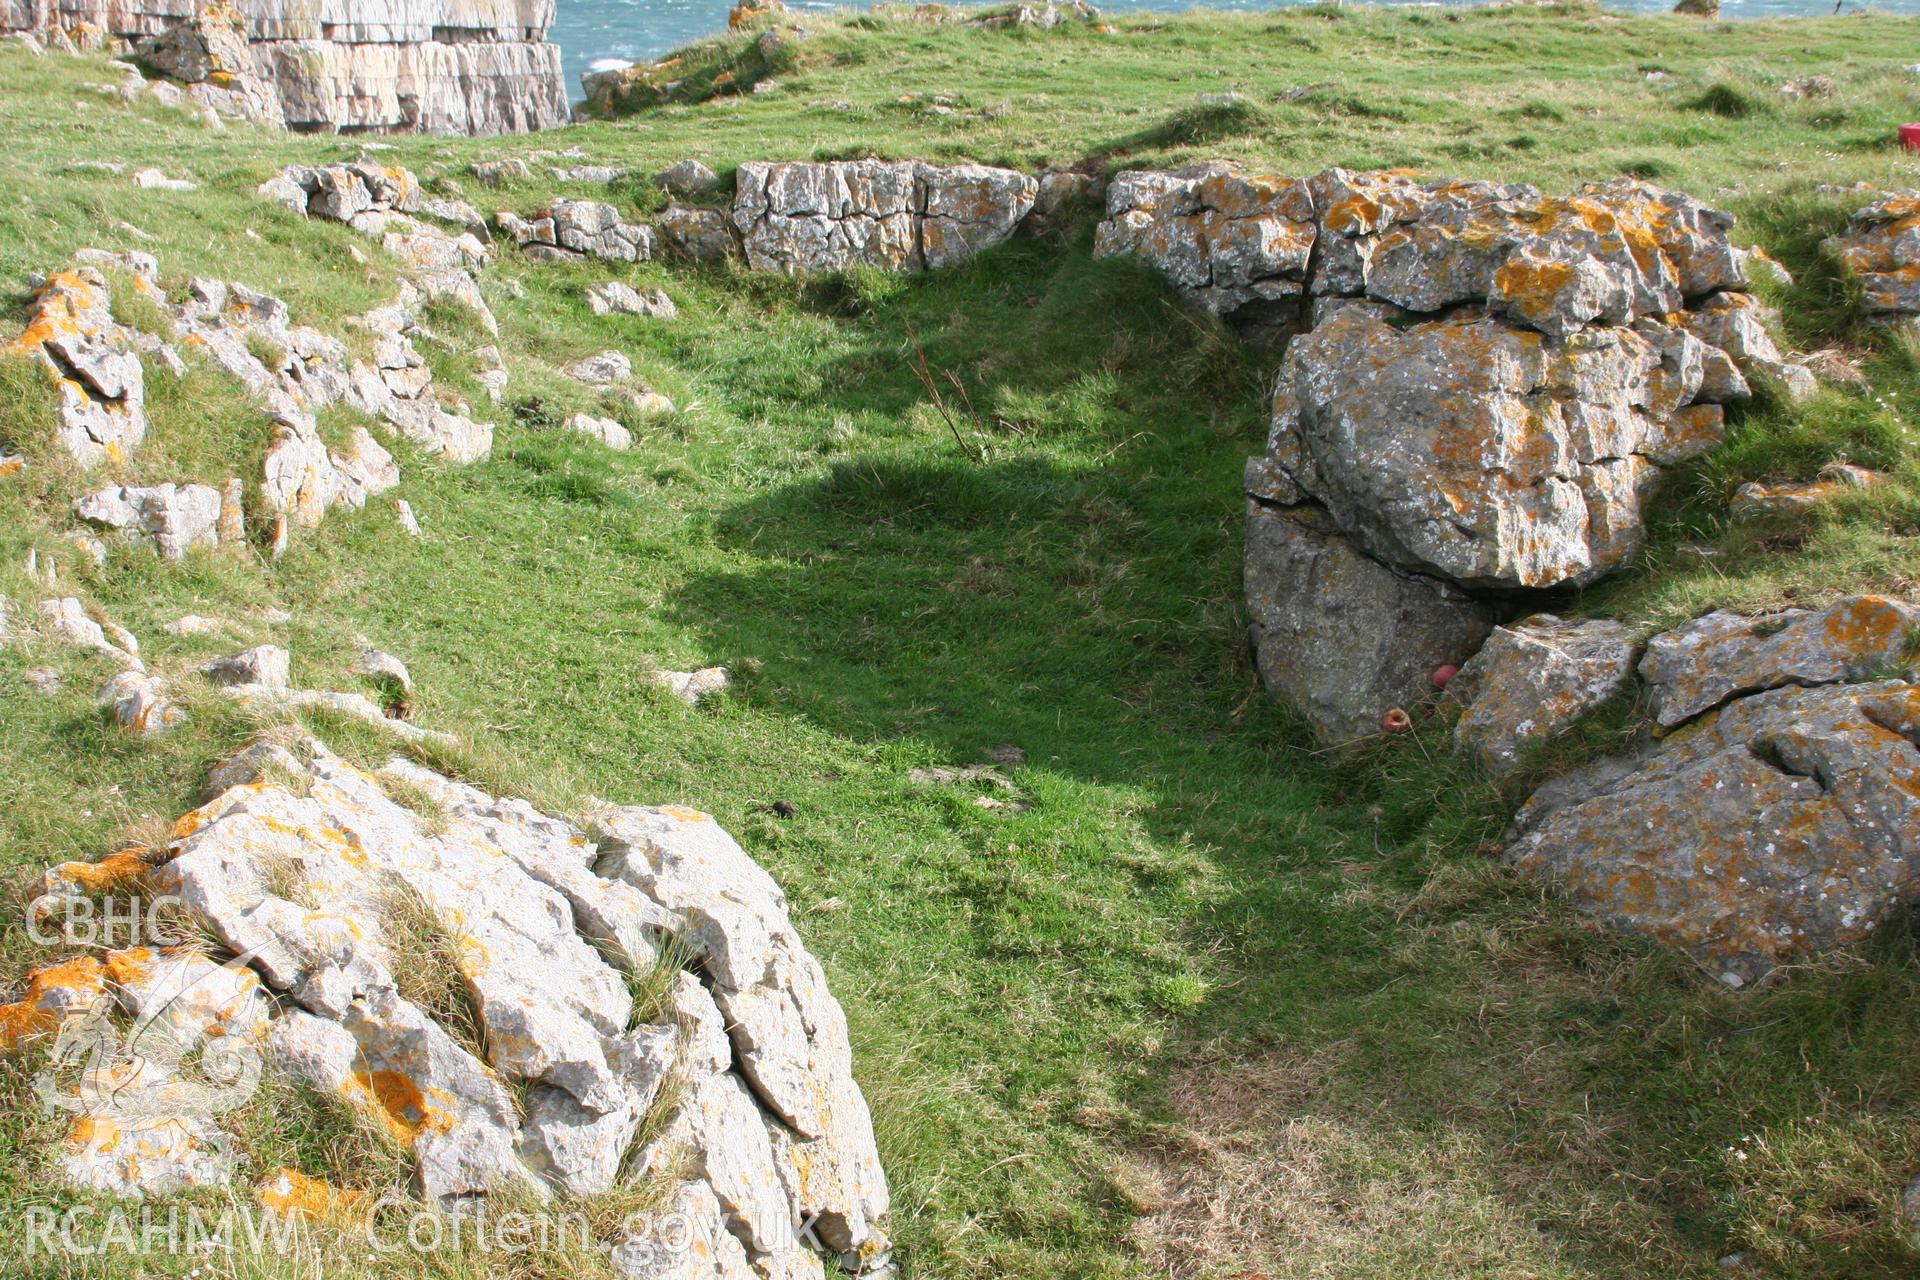 Mowingword promontory enclosure, view of promontory ditch